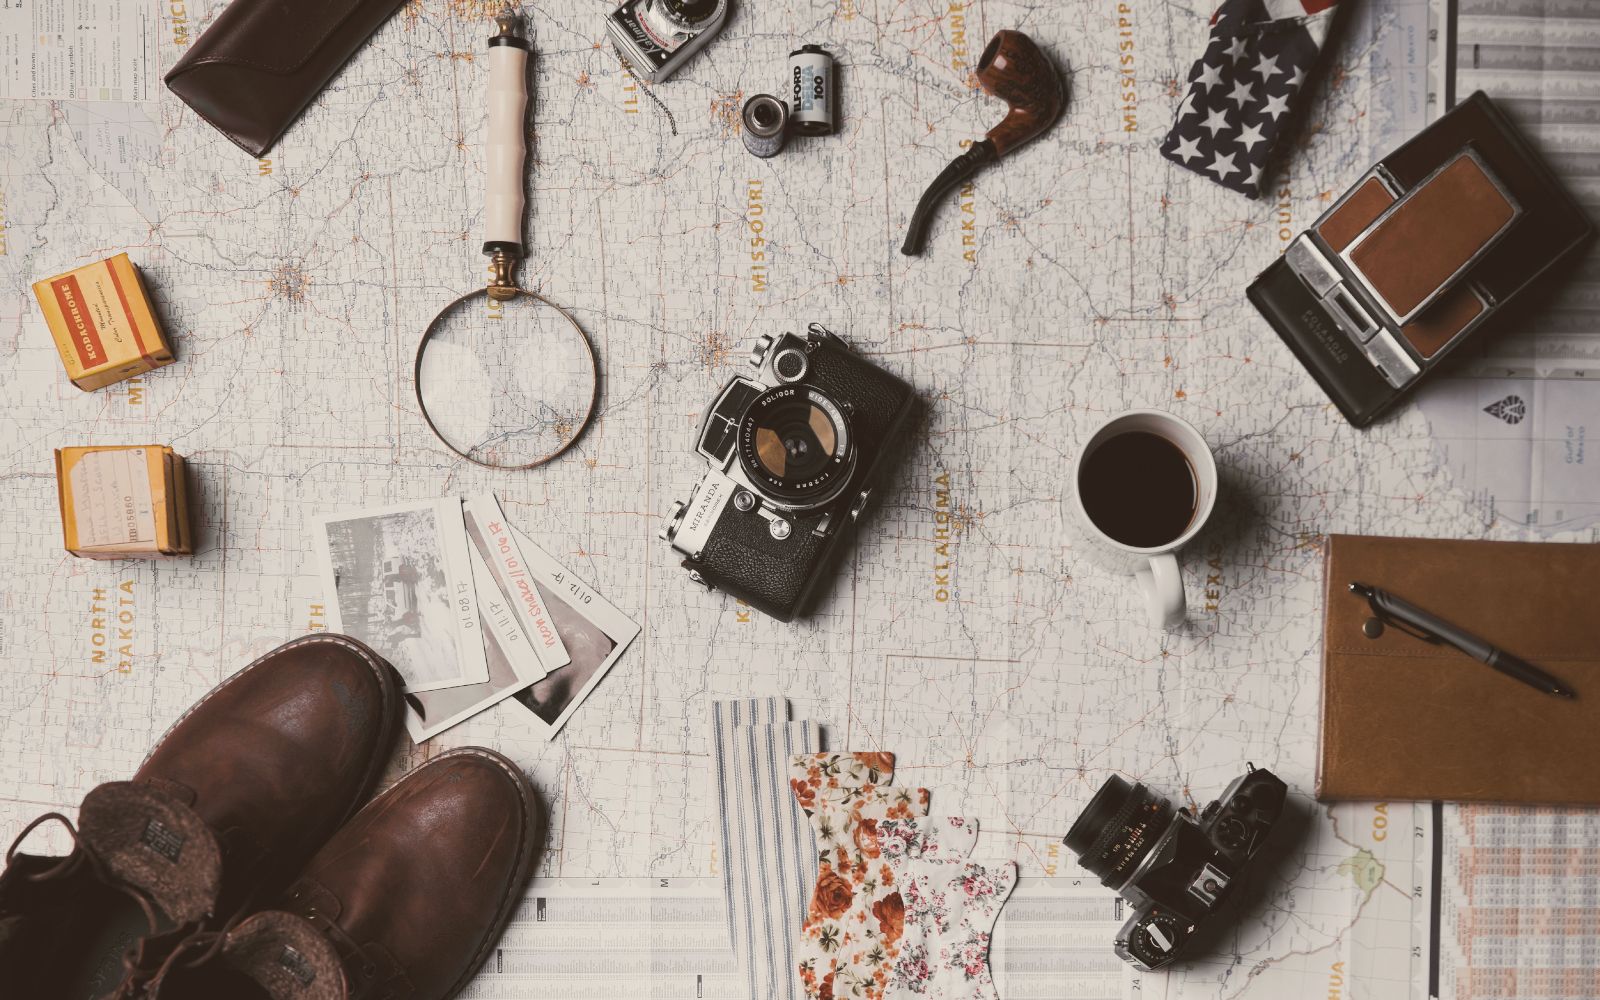 Vintage photography gear laid on map